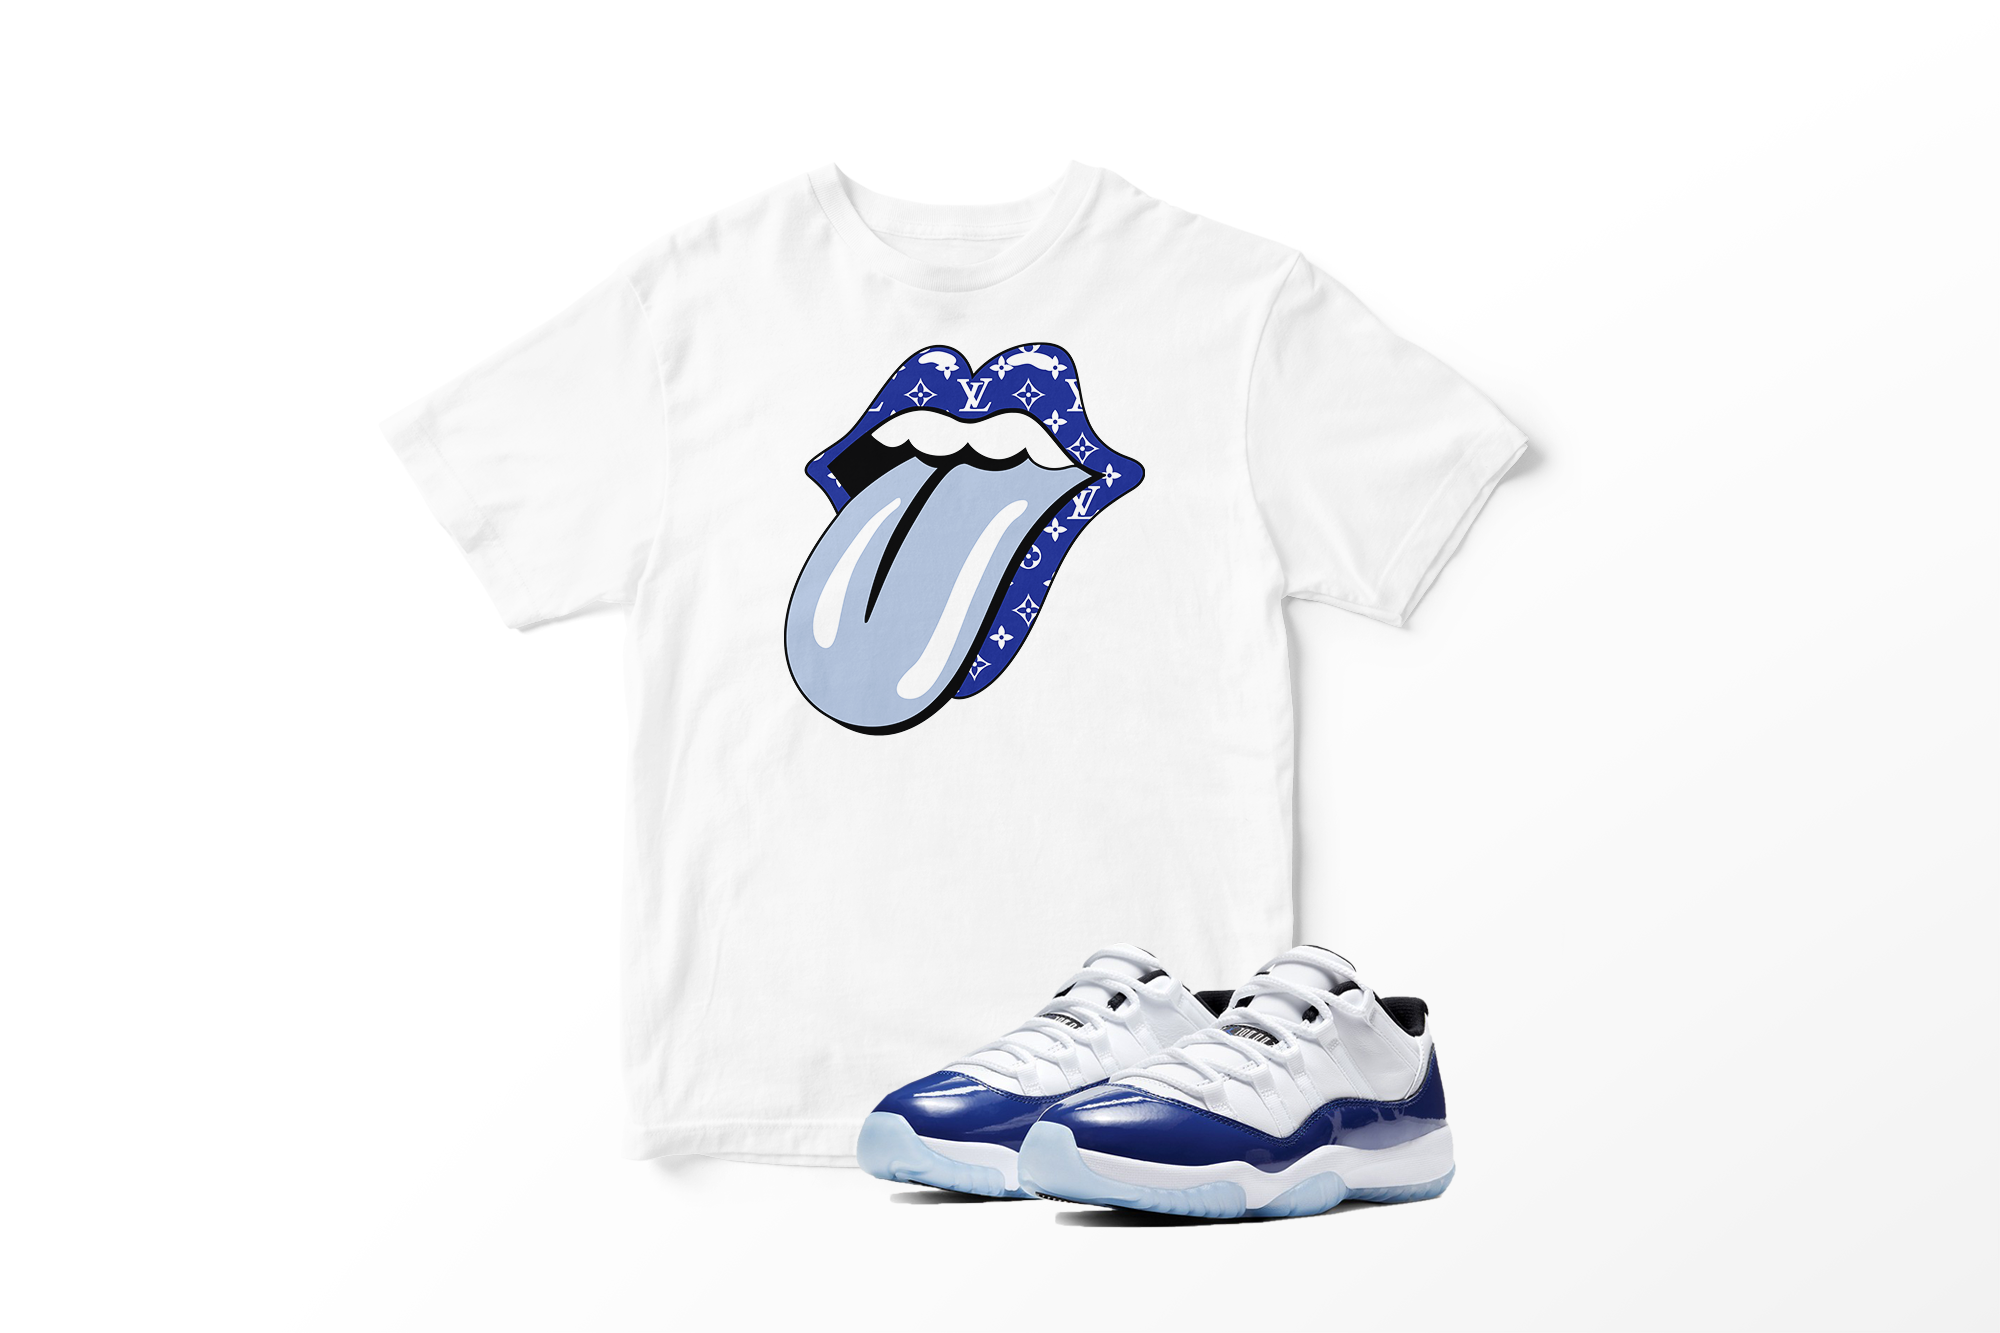 'Rolling Blues' in Concord Sketch CW Short Sleeve Tee